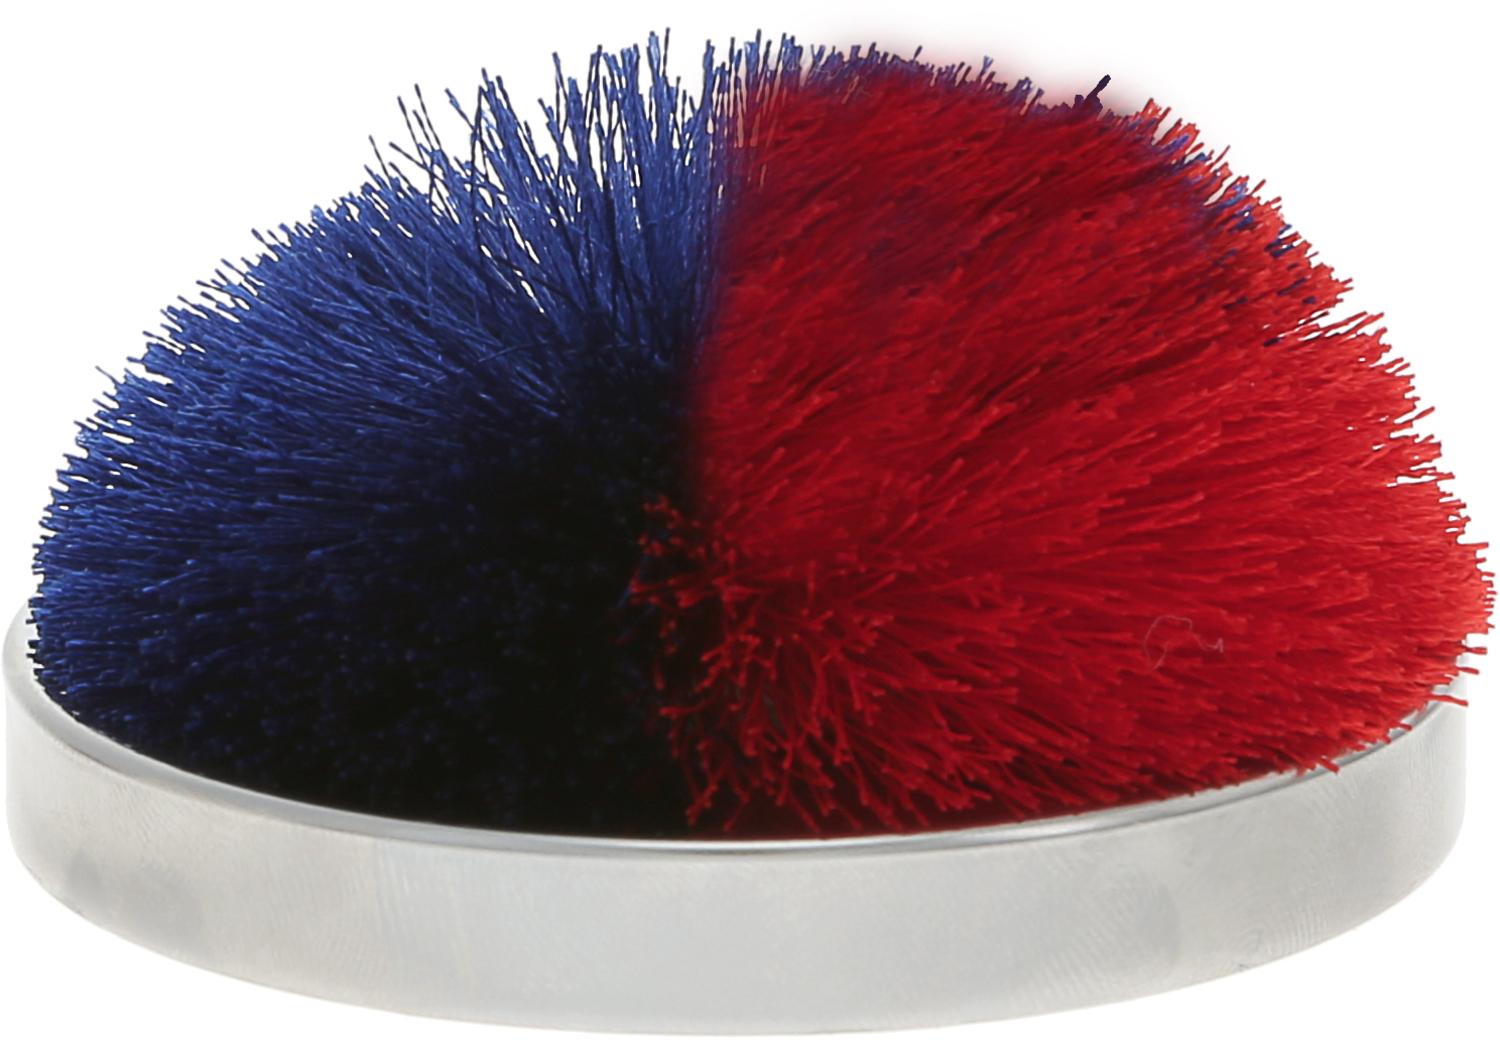 Red & Blue by Repre-Scent - Red & Blue - 2.75" Pom Pom Lid